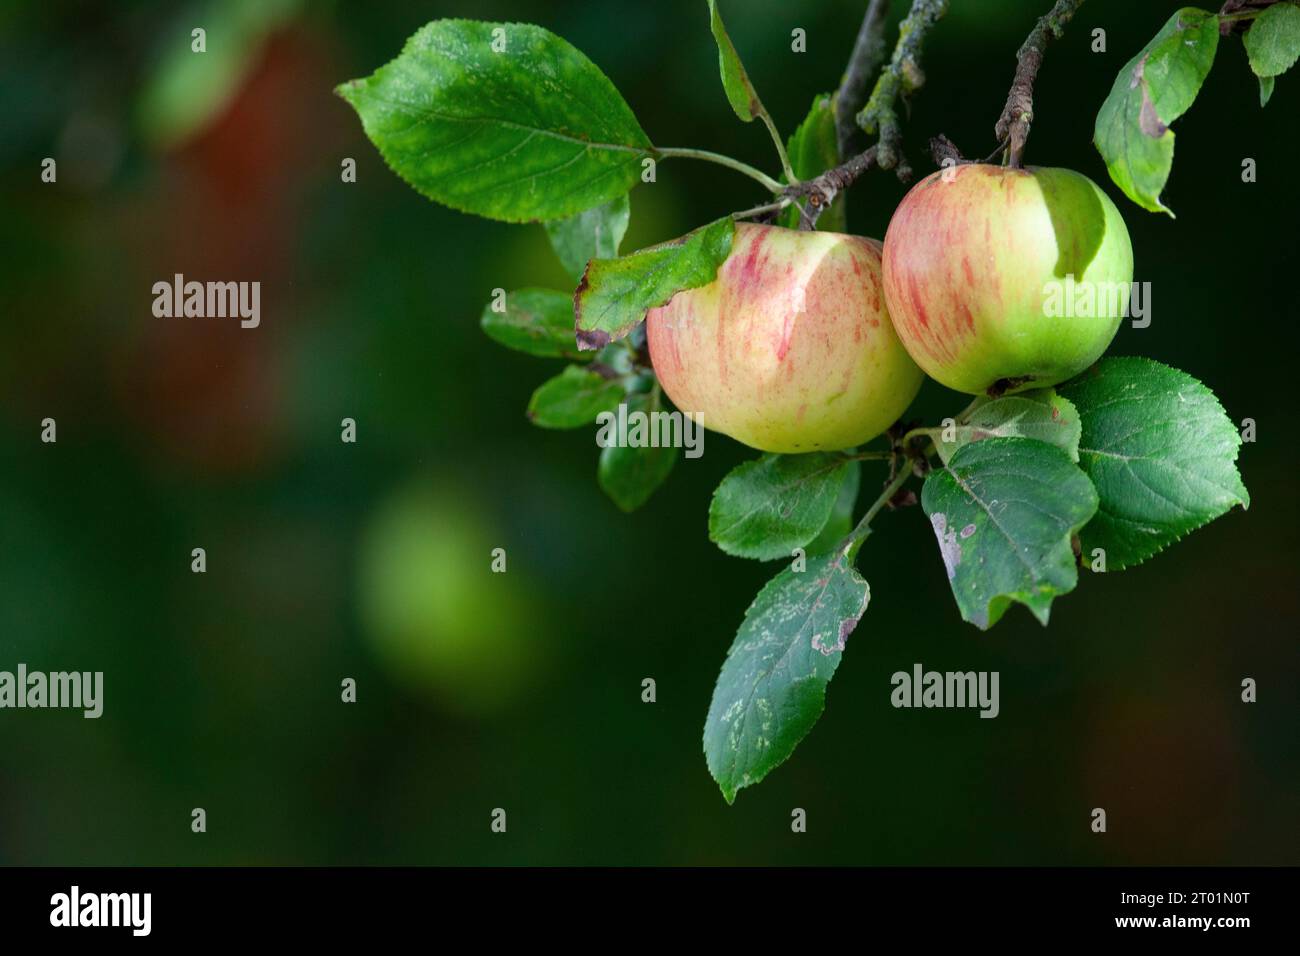 UK weather, 3 October 2023: As autumn progresses apples ripen on a tree in the photographer's garden in Clapham, London. Weather forecasters are projecting temperatures of up to 26 degrees next weekend, well above the usual seasonal average for the time of year. Anna Watson/Alamy Live News Stock Photo